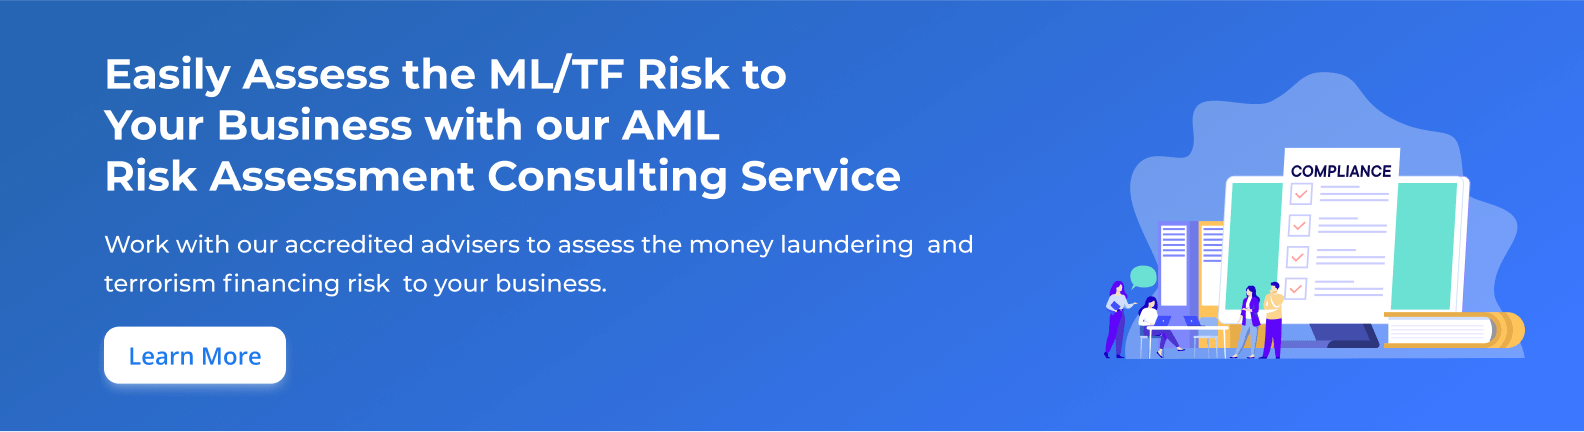 Easily Assess the ML/TF Risk to Your Business with our AML Risk Assessment Consulting Service